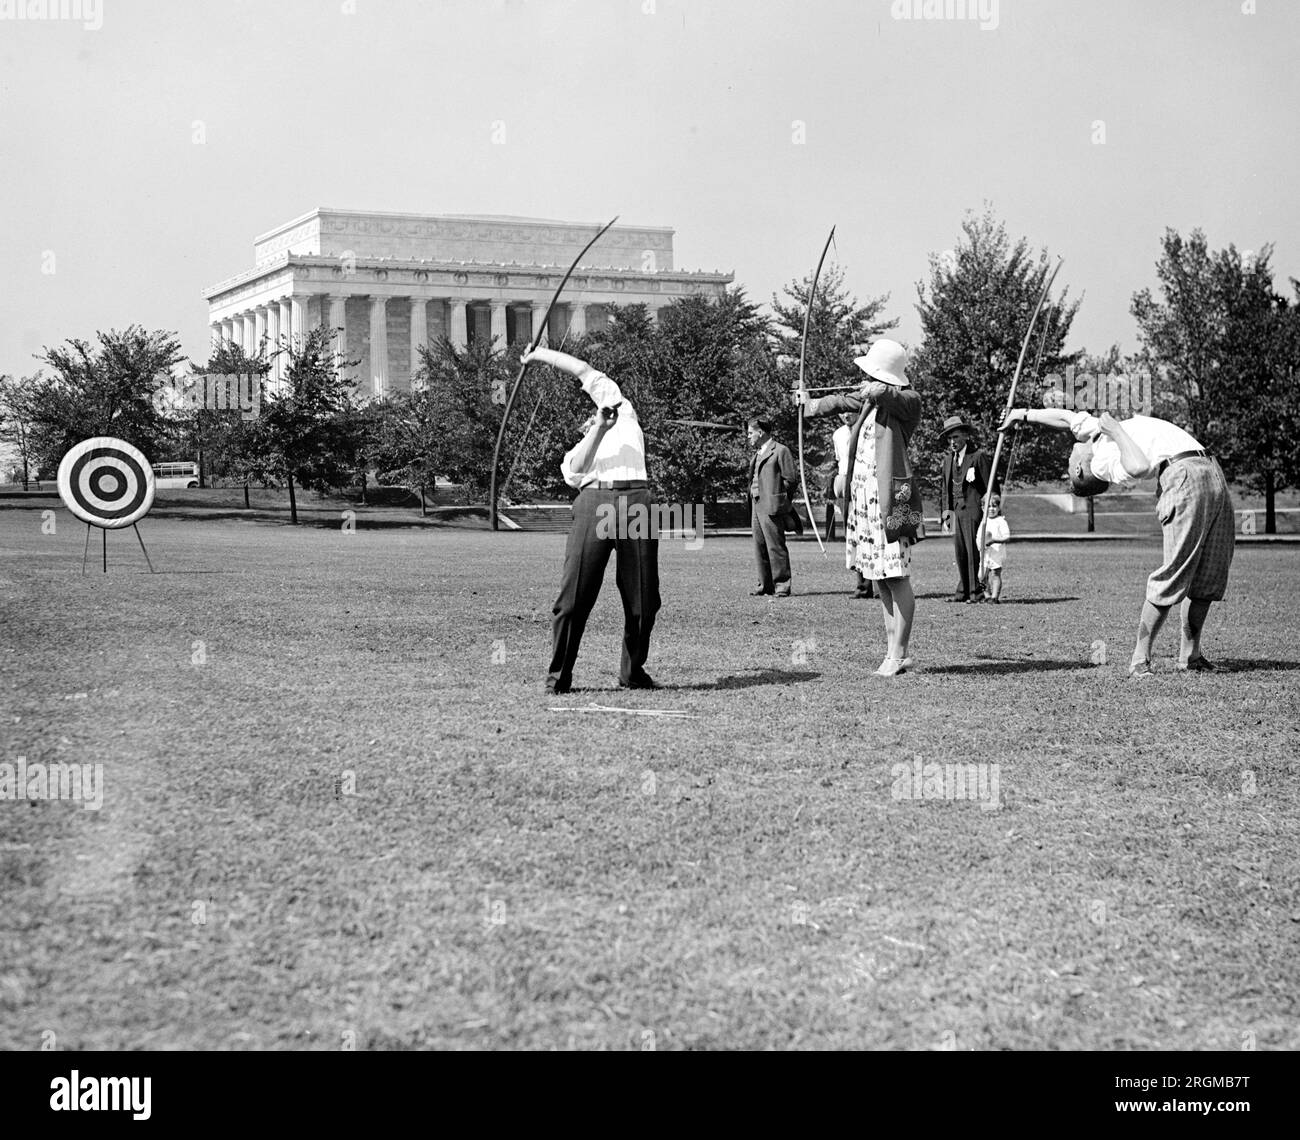 Vintage Archery: Archers trick shooting at a target ca. 1929 Stock Photo